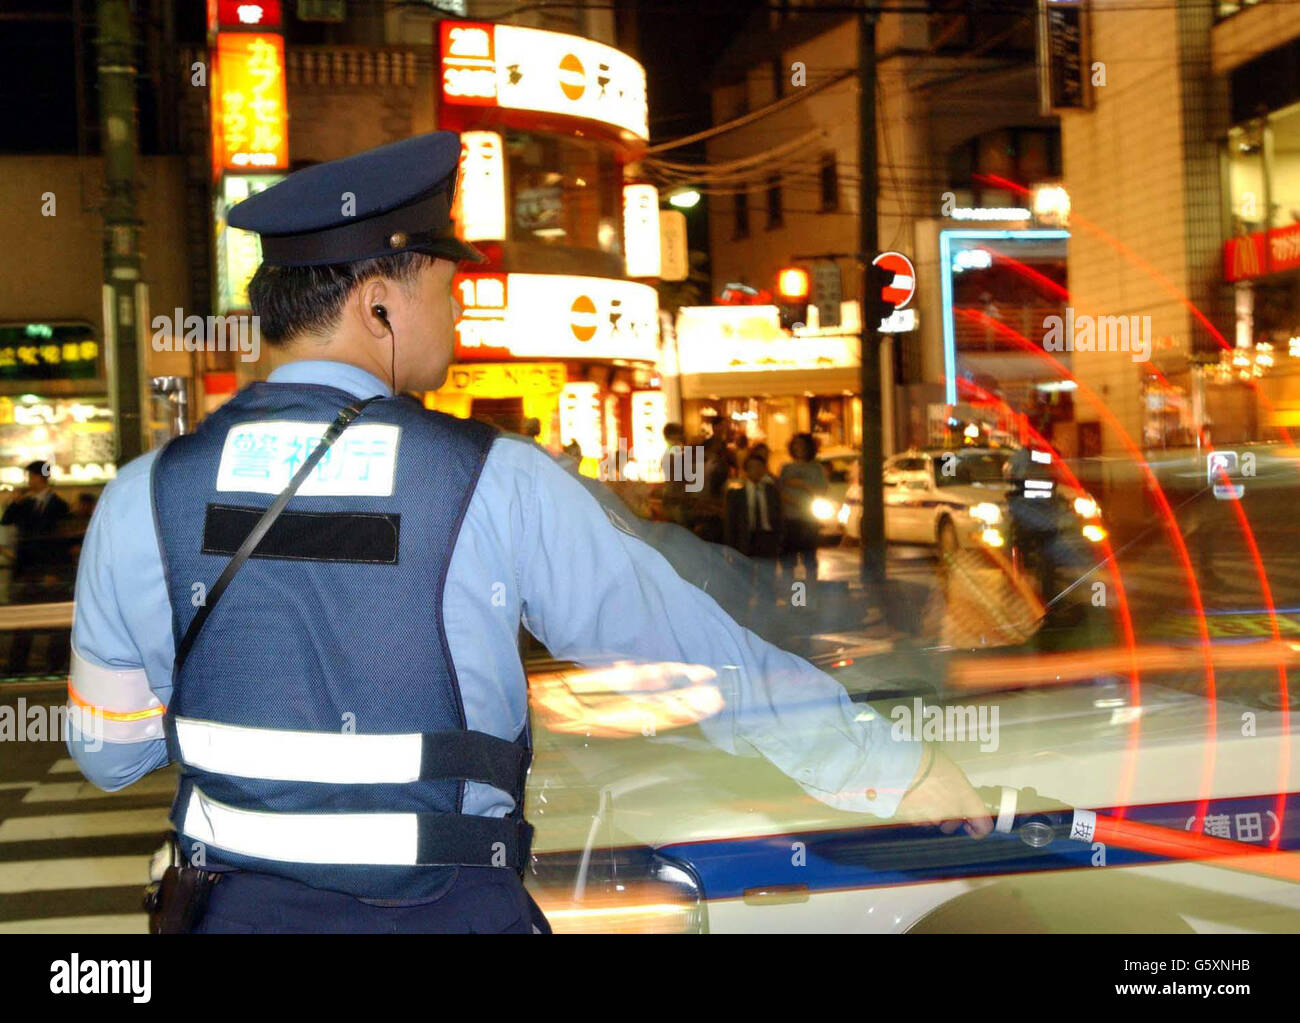 Japanese police officer guarding people on the street in Roppong, Japan. Stock Photo